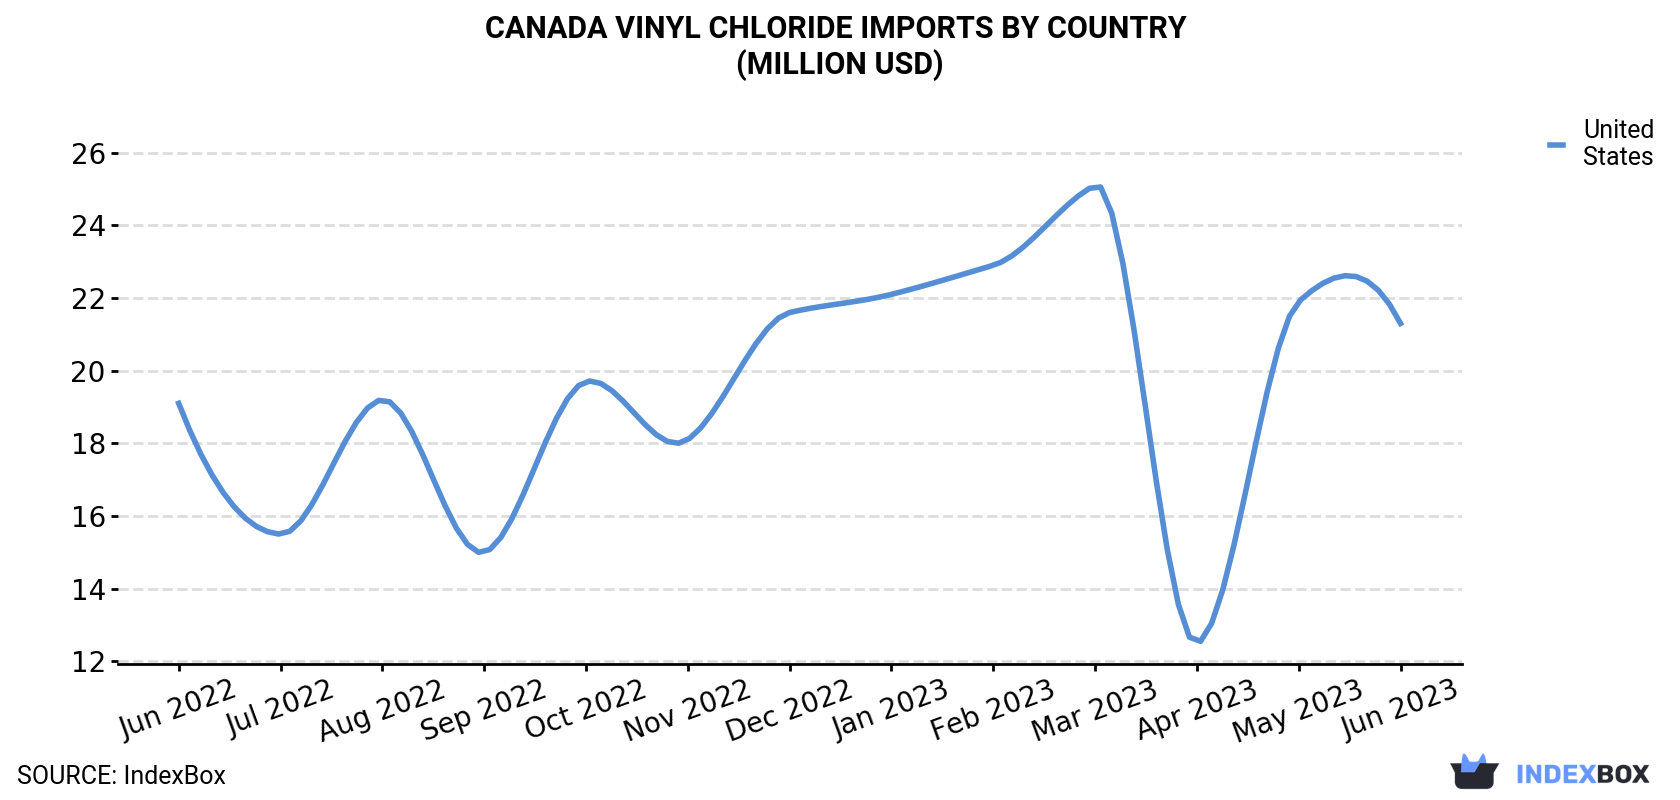 Canada Vinyl Chloride Imports By Country (Million USD)